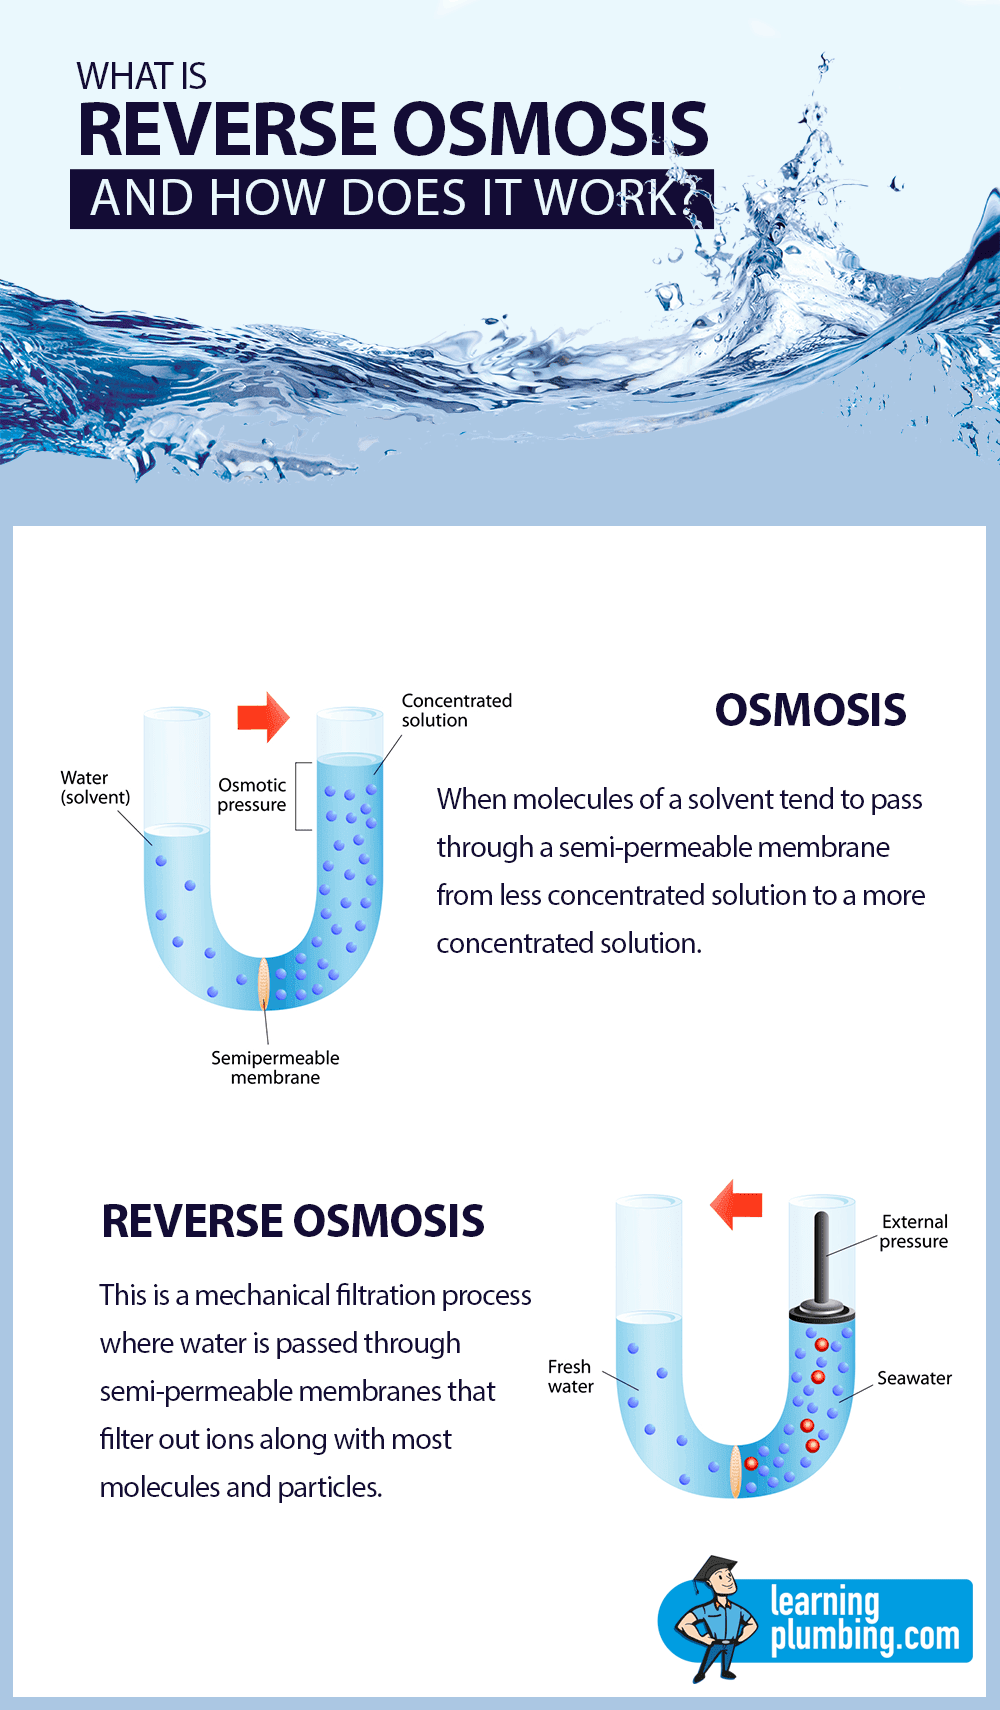 What is Reverse Osmosis and How Does It Work?